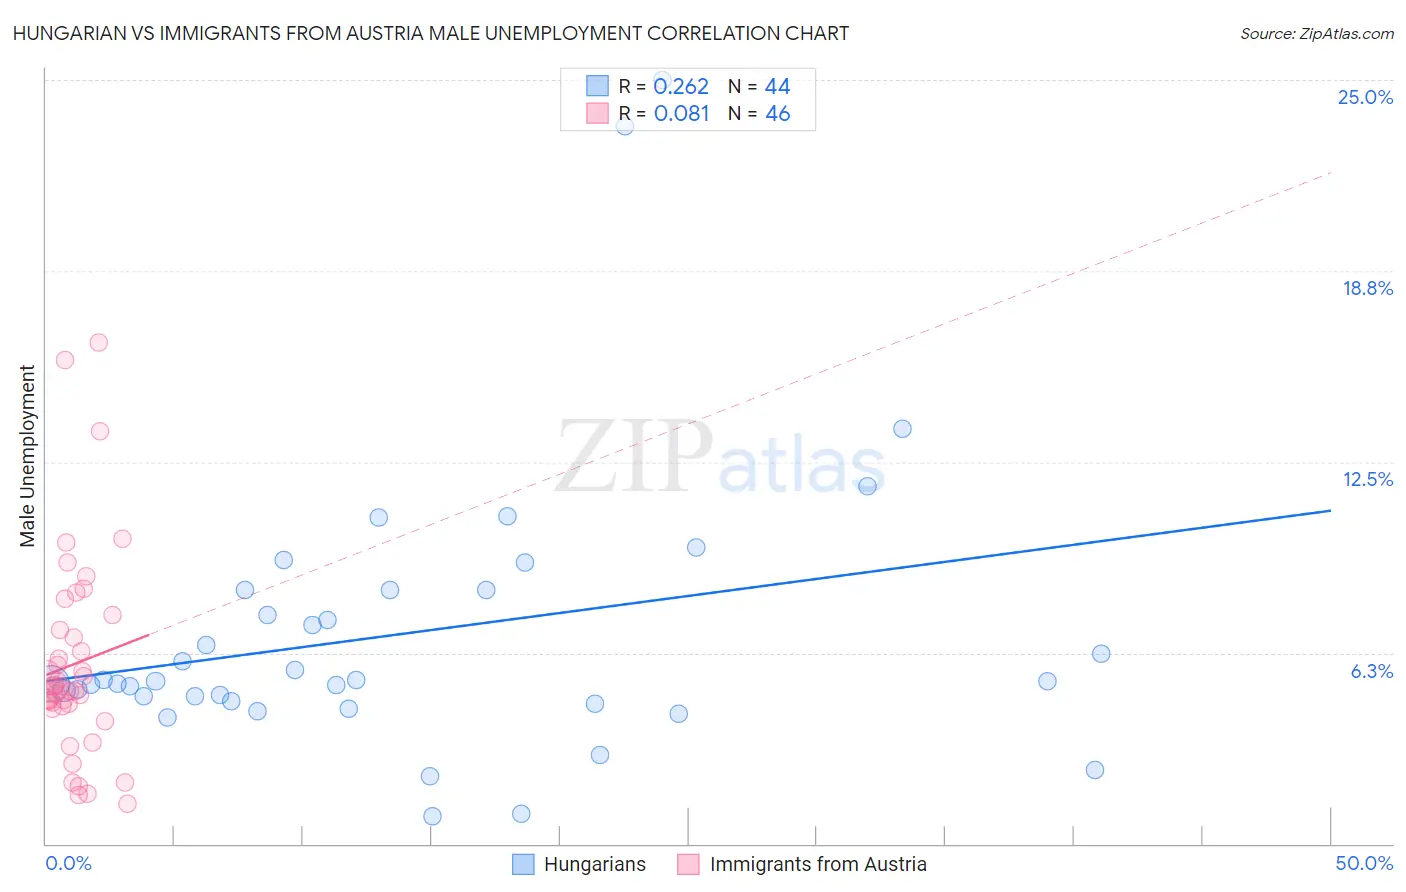 Hungarian vs Immigrants from Austria Male Unemployment